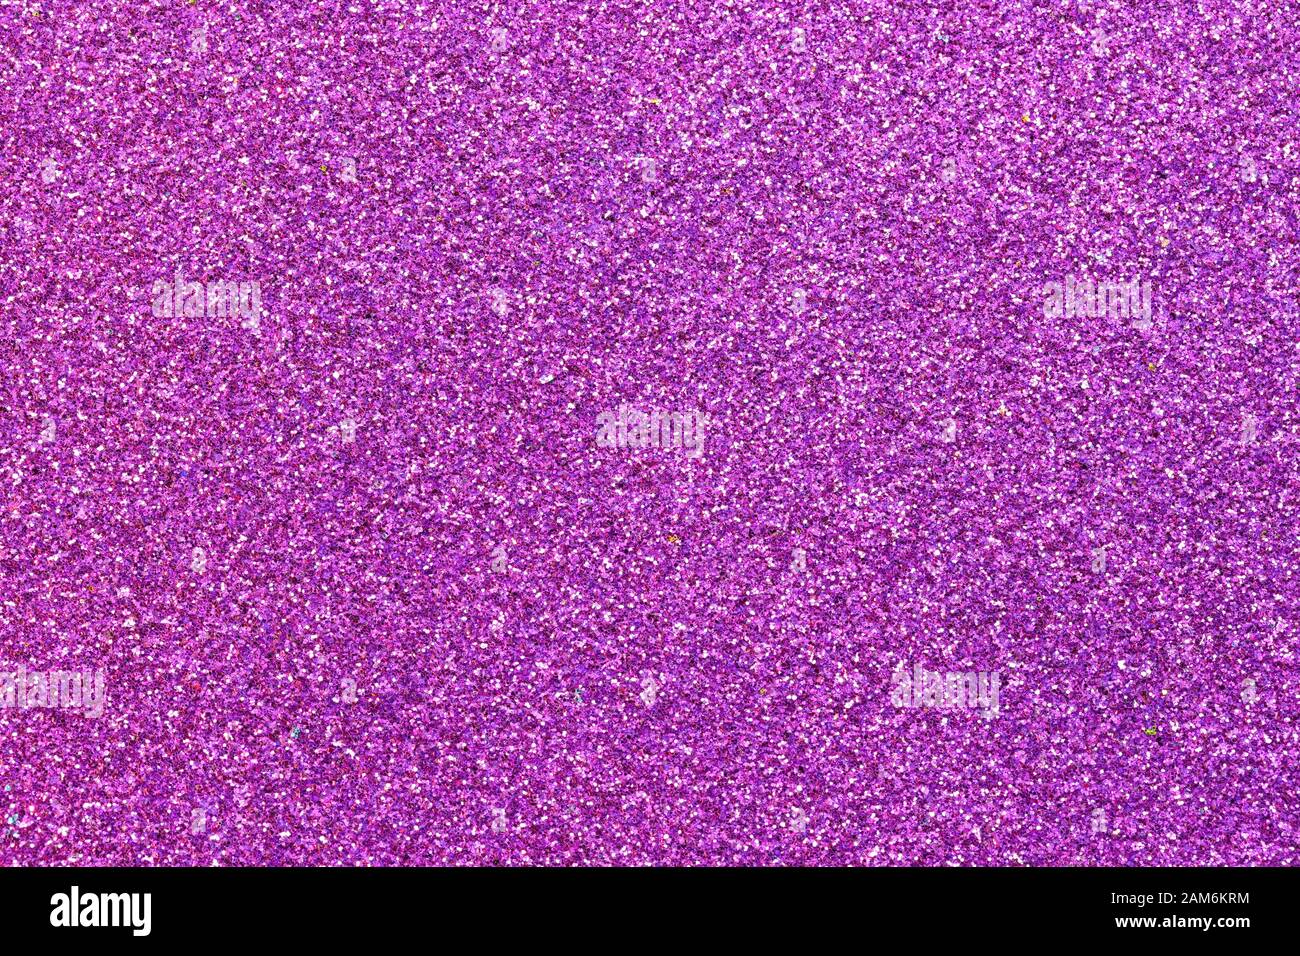 fantastic background of fuchsia glitter panel all shiny and shimmering Stock Photo